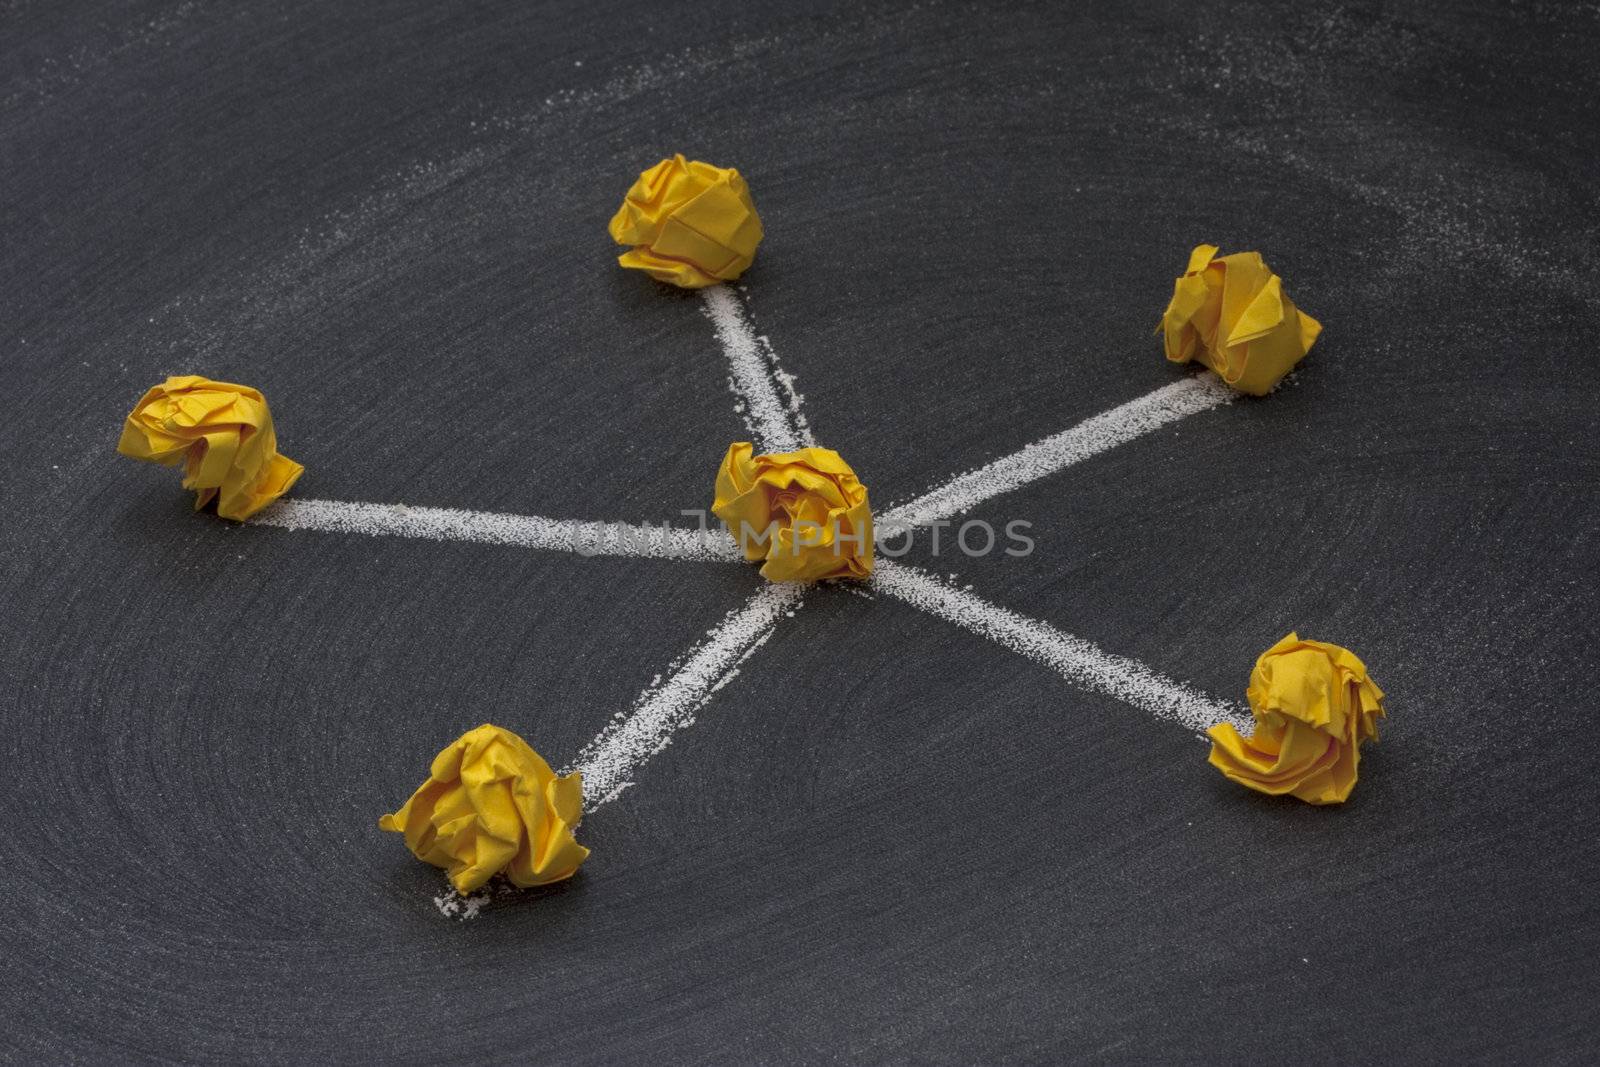 model of star (hub and spokes) network with a central node made with yellow crumbled paper nodes, white chalk connection lines and blackboard with eraser smudges in background